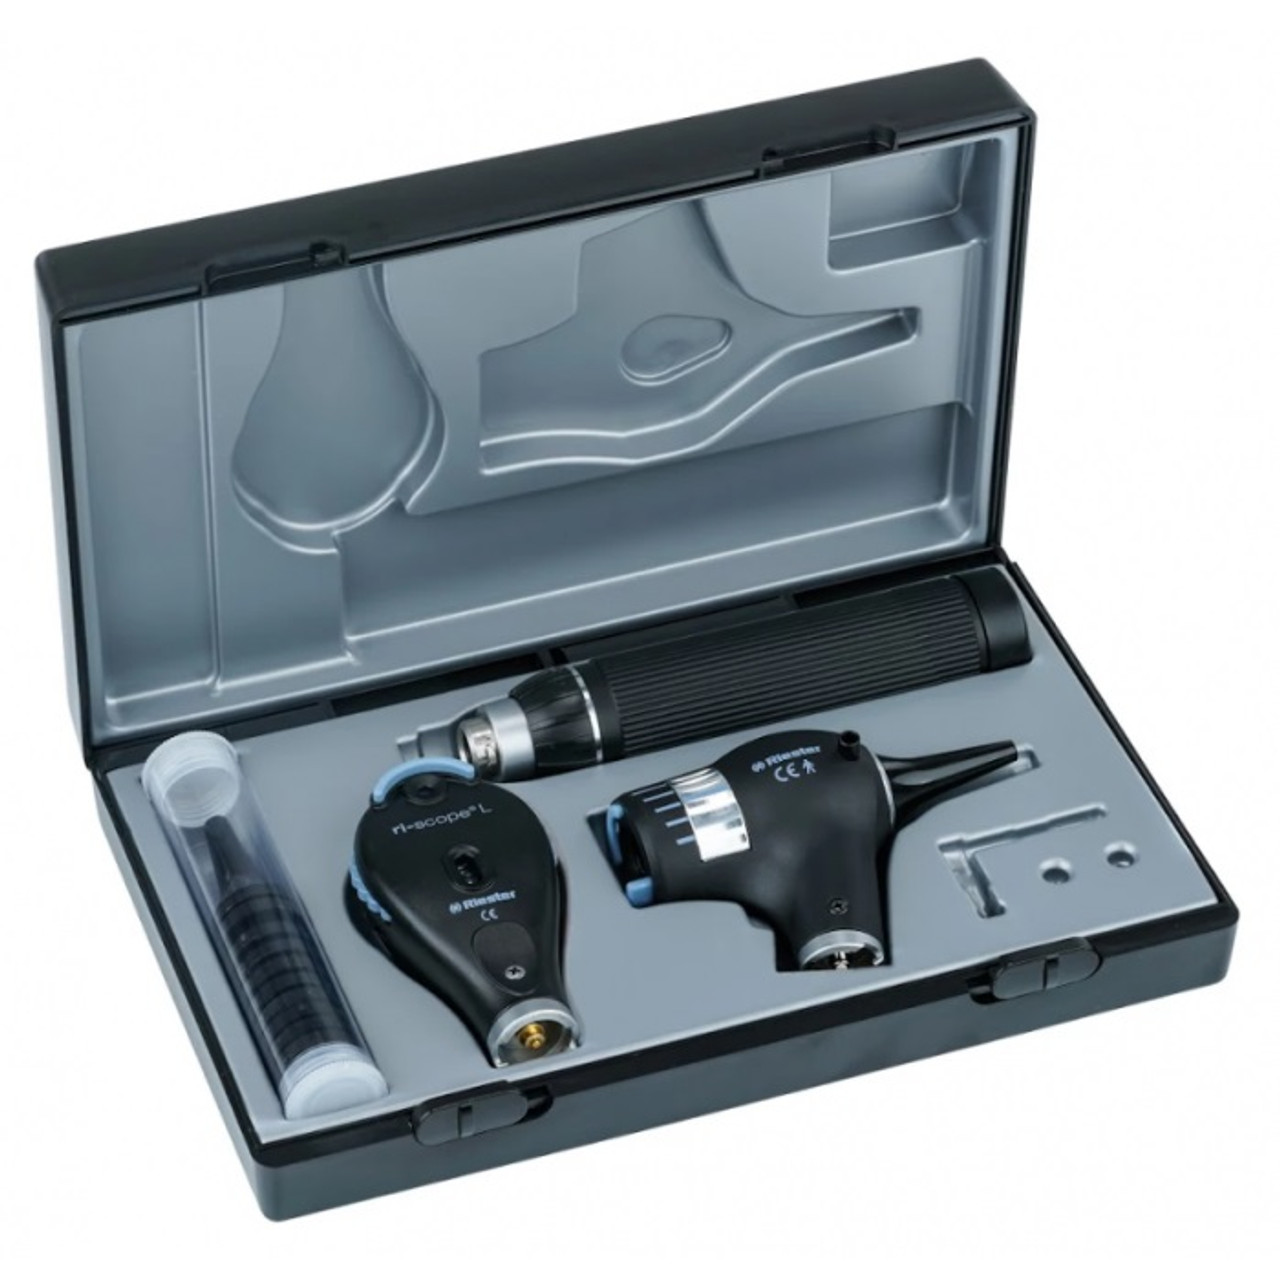 Riester 2211-203.002 Elitevue Otoscope, Led, 3.5V, With 1 C-Handle, 1  Rechargeable Li-Ion Battery And Plug-In Charger